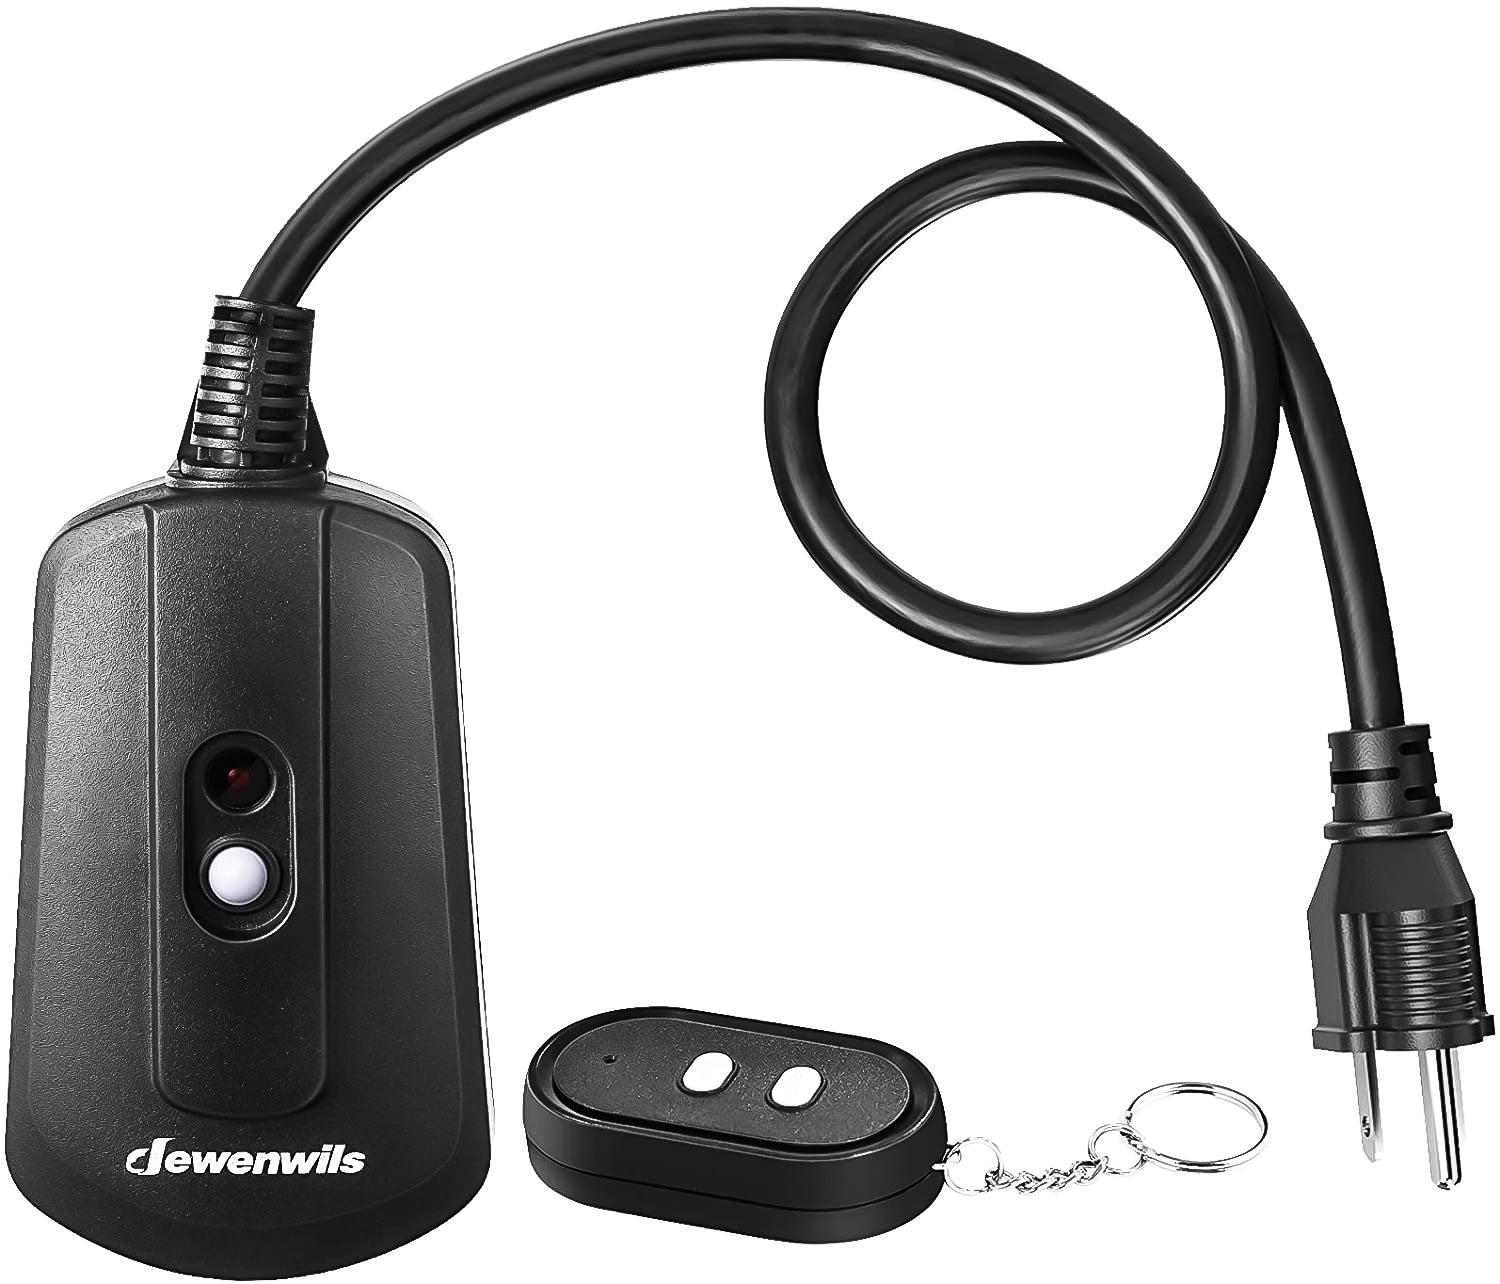 DEWENWILS Outdoor Wireless Remote Control Outlet with 2 FT Extension Cord,  15 amp Heavy Duty Weatherproof Remote Controlled Light Switch for String  Lights, 100 Feet Range, UL Listed